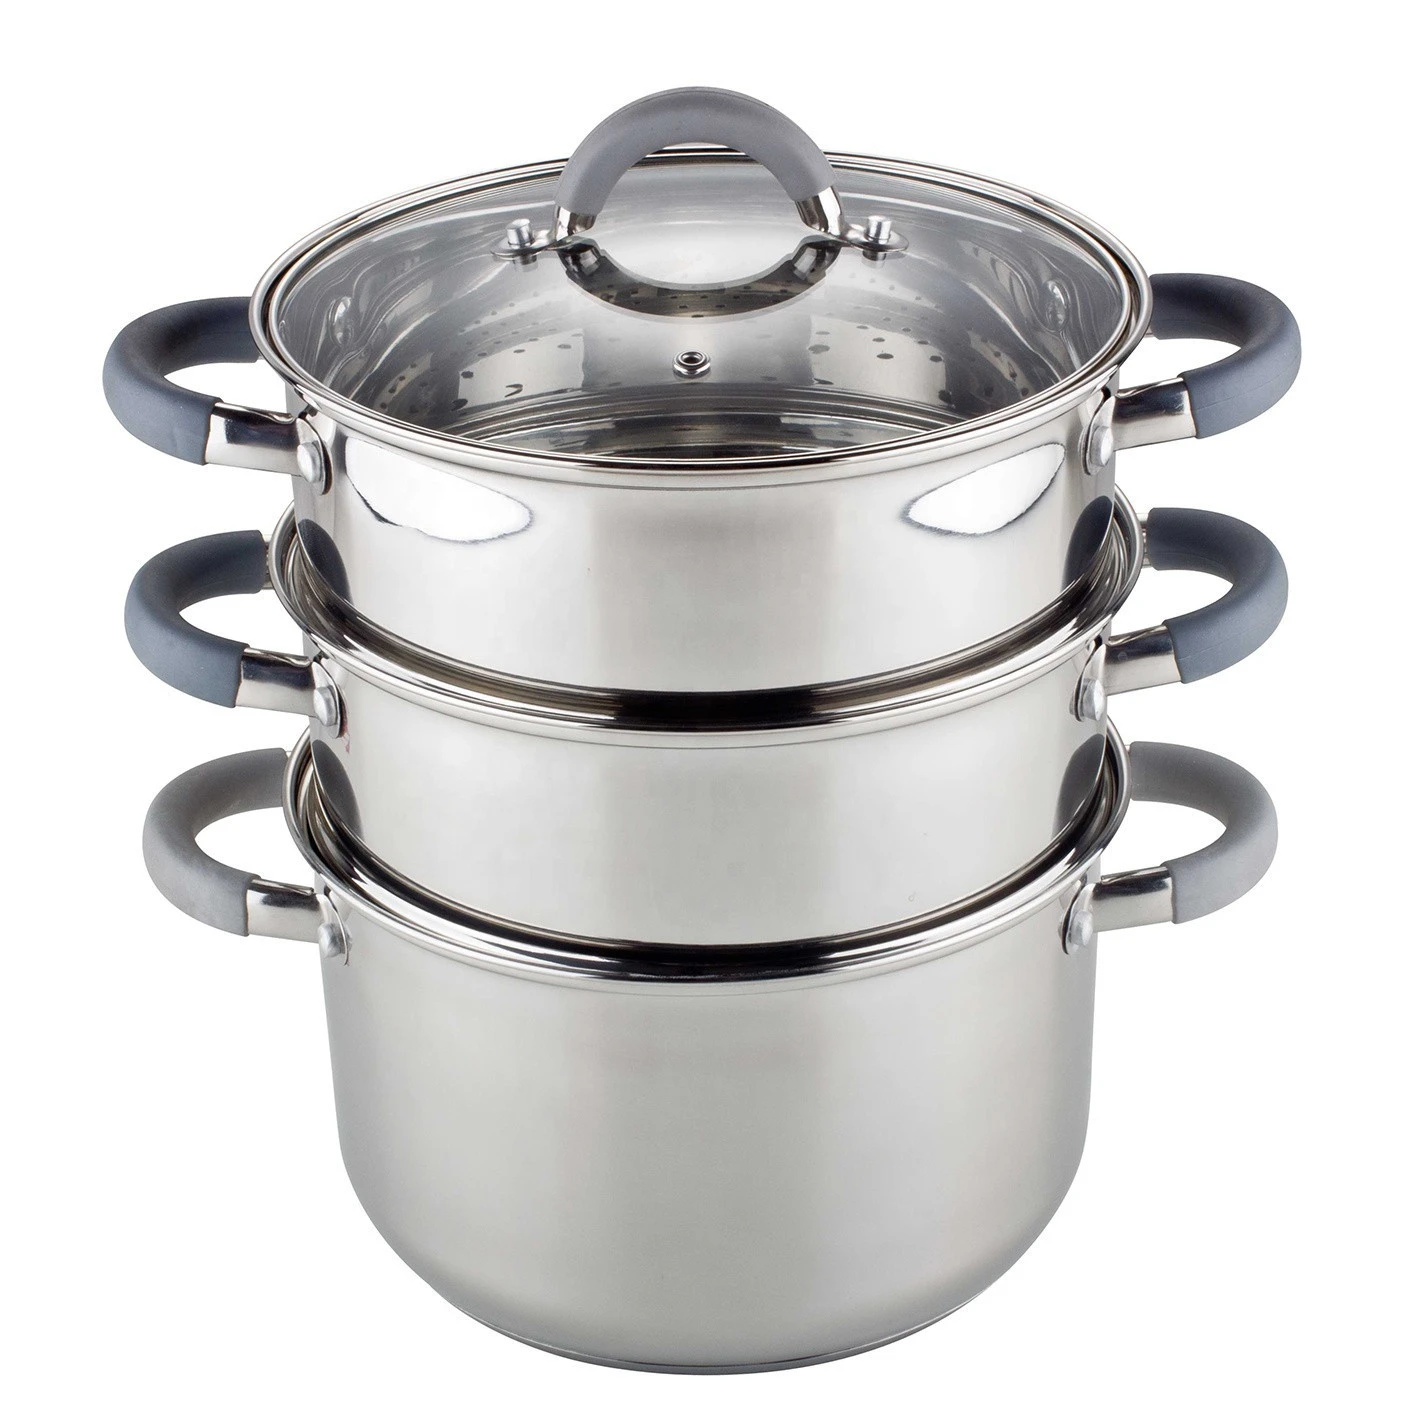 Hot Selling Stainless Steel Soup Pot OEM Cookware Casserole with Steamer Popular Stock Pot